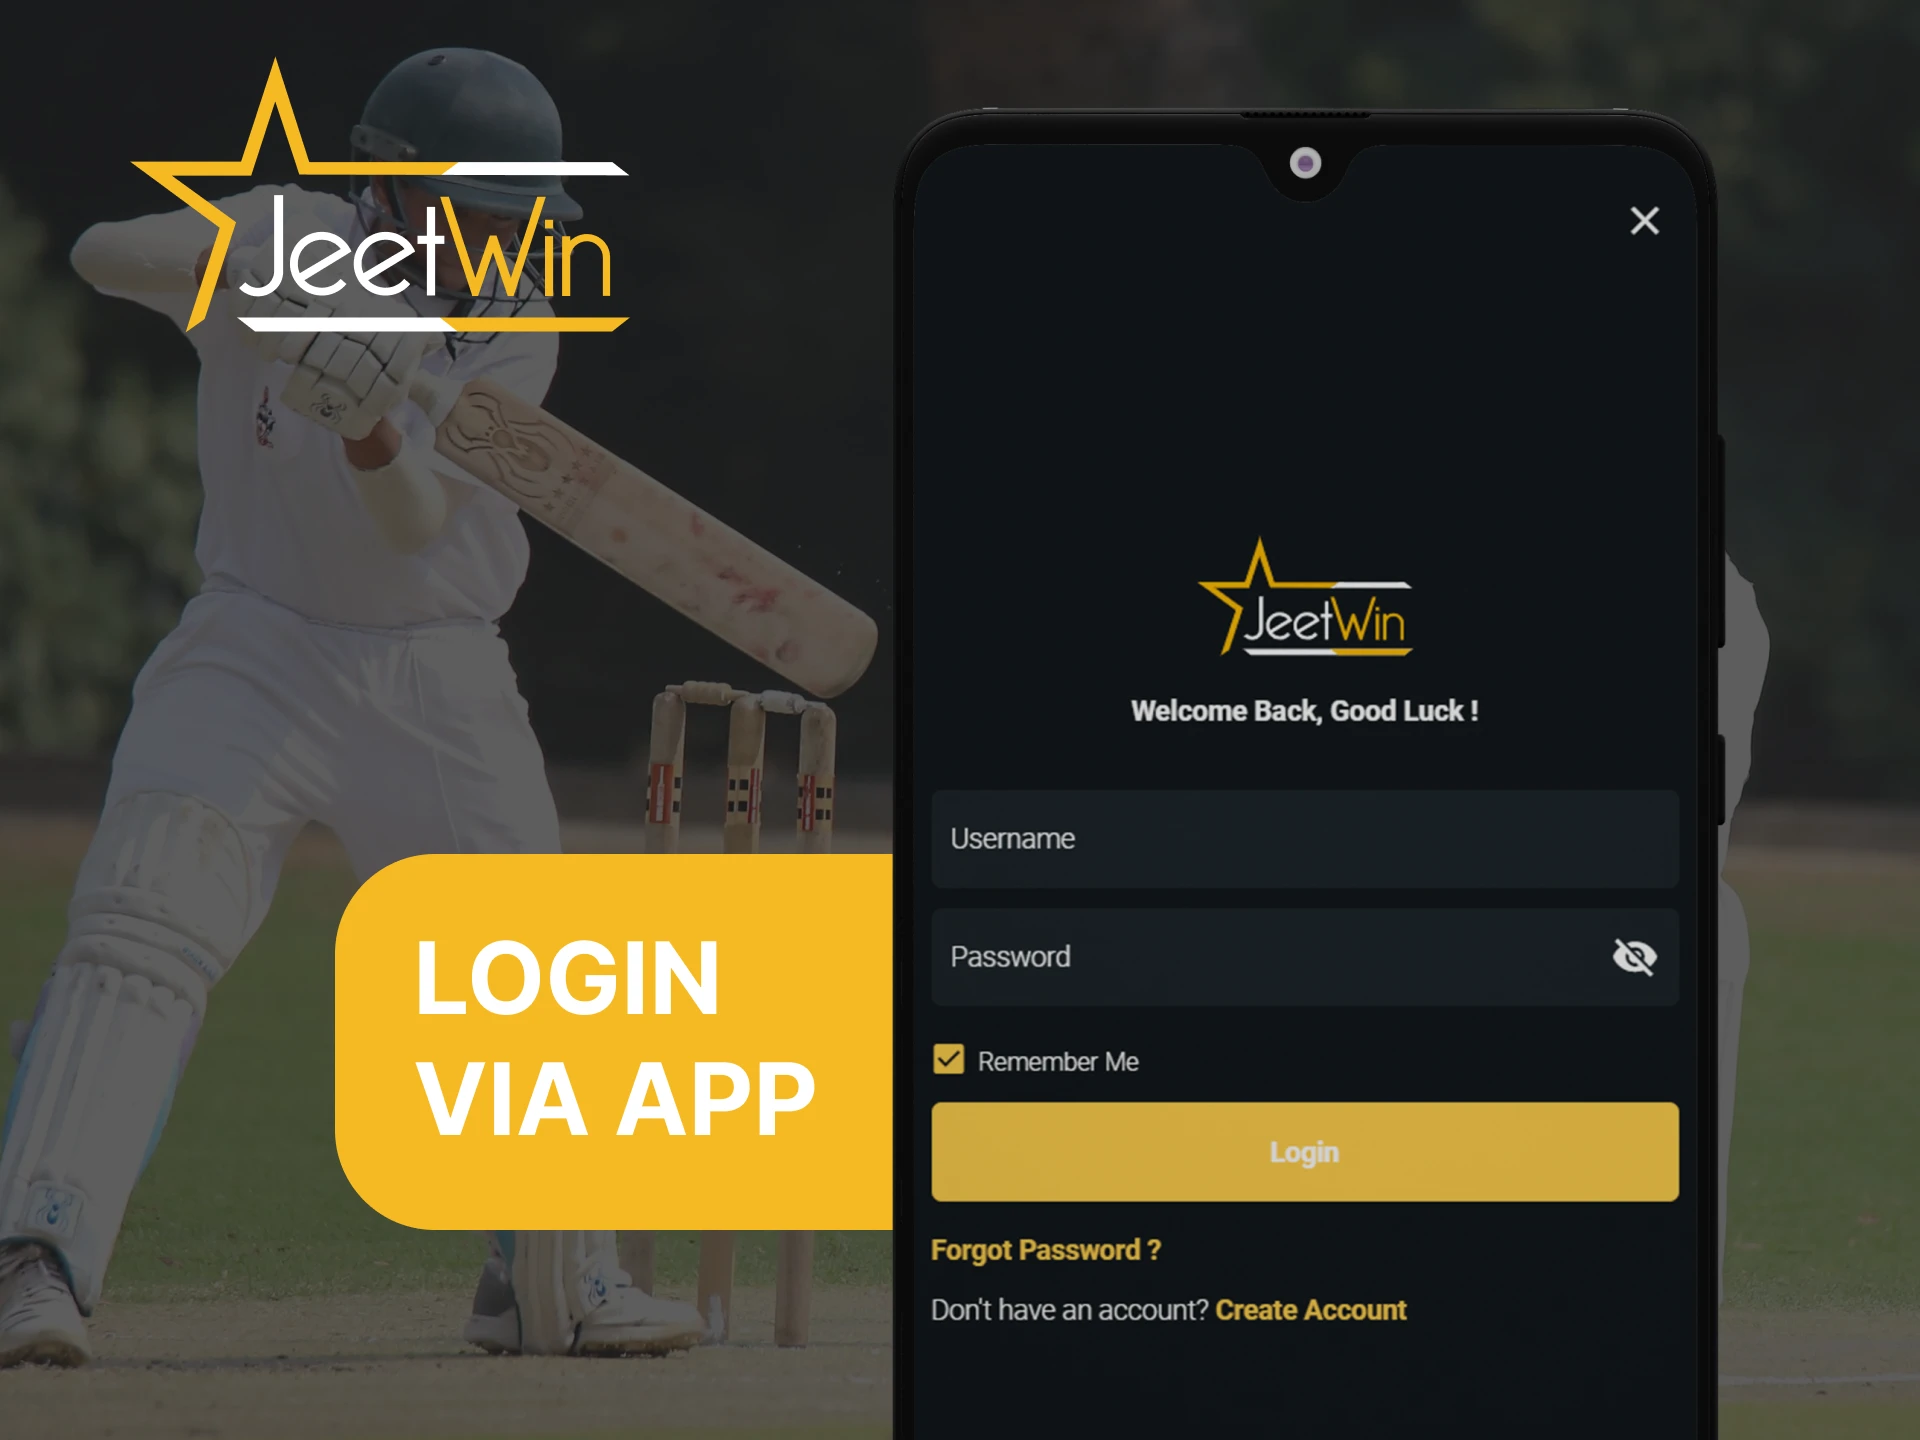 Download Jeetwin mobile app and login to your account.